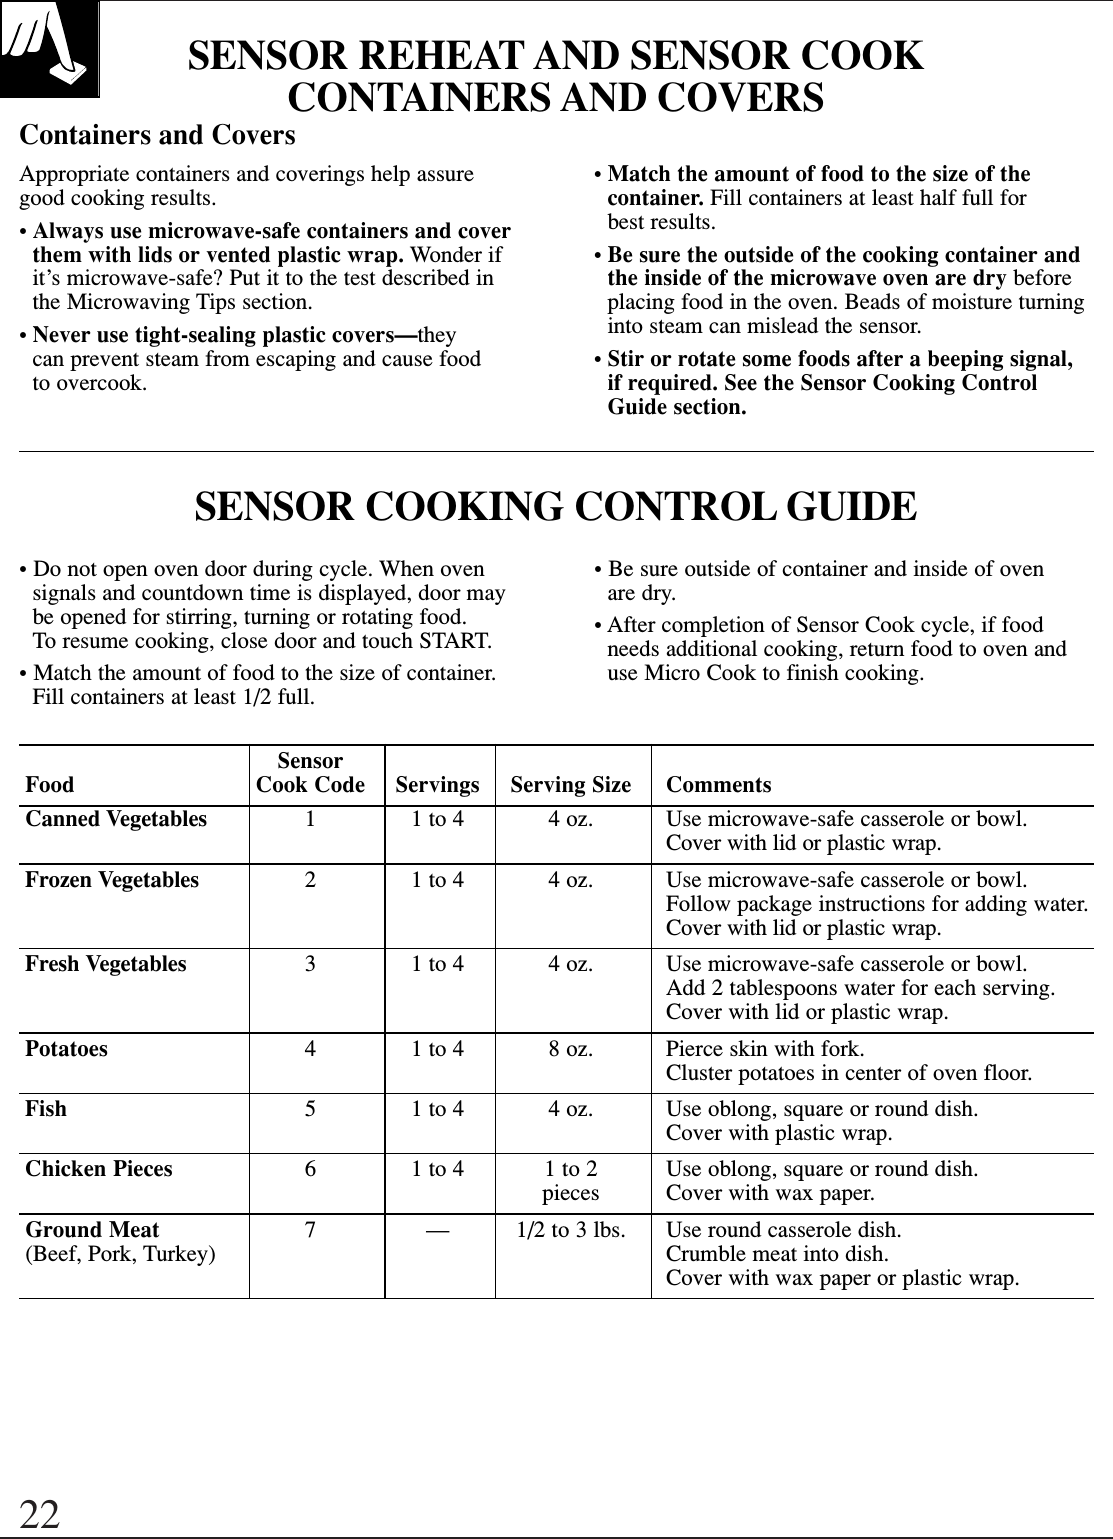 22SENSOR REHEAT AND SENSOR COOKCONTAINERS AND COVERSContainers and CoversAppropriate containers and coverings help assuregood cooking results.•Always use microwave-safe containers and coverthem with lids or vented plastic wrap. Wonder ifit’s microwave-safe? Put it to the test described inthe Microwaving Tips section.•Never use tight-sealing plastic covers—they can prevent steam from escaping and cause food to overcook.•Match the amount of food to the size of thecontainer. Fill containers at least half full for best results.•Be sure the outside of the cooking container andthe inside of the microwave oven are dry beforeplacing food in the oven. Beads of moisture turninginto steam can mislead the sensor.•Stir or rotate some foods after a beeping signal, if required. See the Sensor Cooking ControlGuide section.• Do not open oven door during cycle. When ovensignals and countdown time is displayed, door maybe opened for stirring, turning or rotating food. To resume cooking, close door and touch START.• Match the amount of food to the size of container.Fill containers at least 1/2 full.• Be sure outside of container and inside of oven are dry.• After completion of Sensor Cook cycle, if foodneeds additional cooking, return food to oven anduse Micro Cook to finish cooking.SENSOR COOKING CONTROL GUIDESensorFood Cook Code Servings Serving Size CommentsCanned Vegetables 1 1 to 4 4 oz. Use microwave-safe casserole or bowl.Cover with lid or plastic wrap.Frozen Vegetables 2 1 to 4 4 oz. Use microwave-safe casserole or bowl.Follow package instructions for adding water. Cover with lid or plastic wrap.Fresh Vegetables 3 1 to 4 4 oz. Use microwave-safe casserole or bowl. Add 2 tablespoons water for each serving. Cover with lid or plastic wrap.Potatoes 4 1 to 4 8 oz. Pierce skin with fork. Cluster potatoes in center of oven floor.Fish 5 1 to 4 4 oz. Use oblong, square or round dish. Cover with plastic wrap.Chicken Pieces 6 1 to 4 1 to 2 Use oblong, square or round dish. pieces Cover with wax paper.Ground Meat 7 — 1/2 to 3 lbs. Use round casserole dish. (Beef, Pork, Turkey) Crumble meat into dish.Cover with wax paper or plastic wrap.